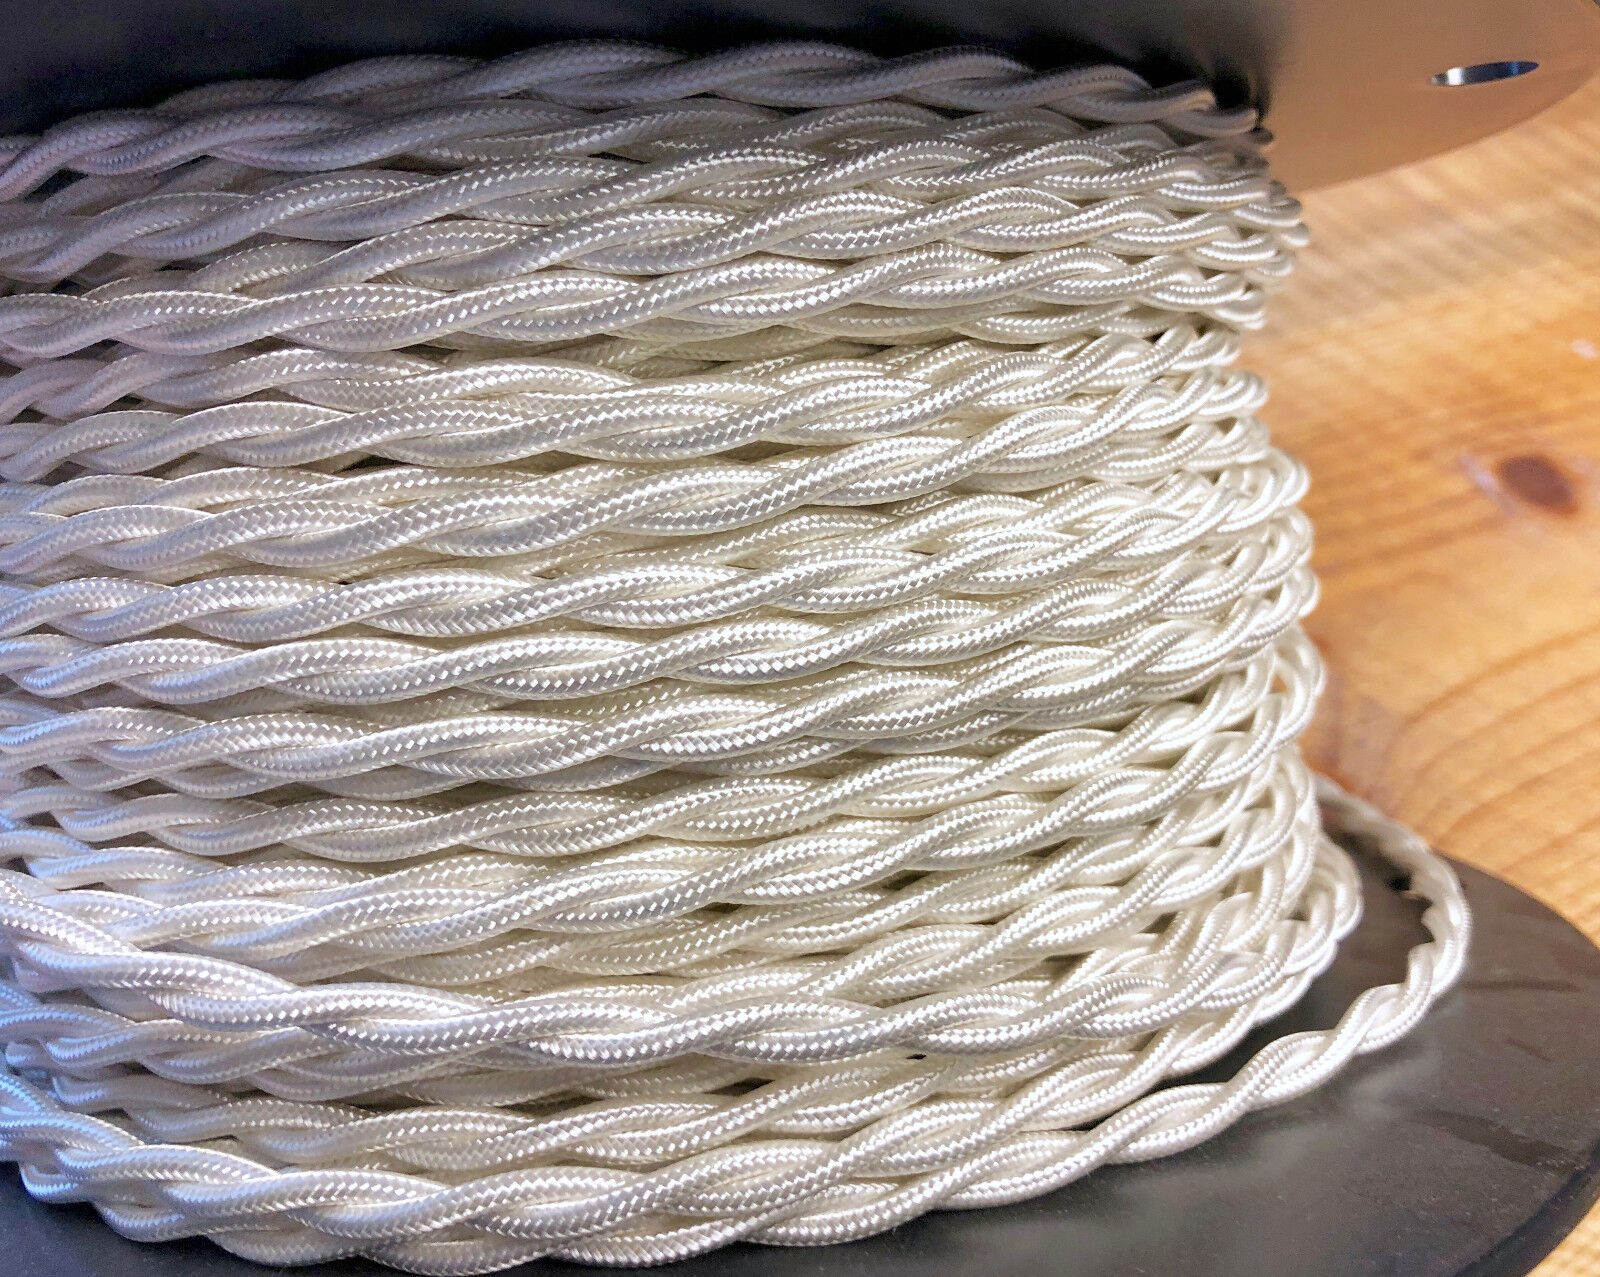 White Rayon Twisted Cloth Covered Wire, Vintage Lamp Cord, Antique Lights, Fans